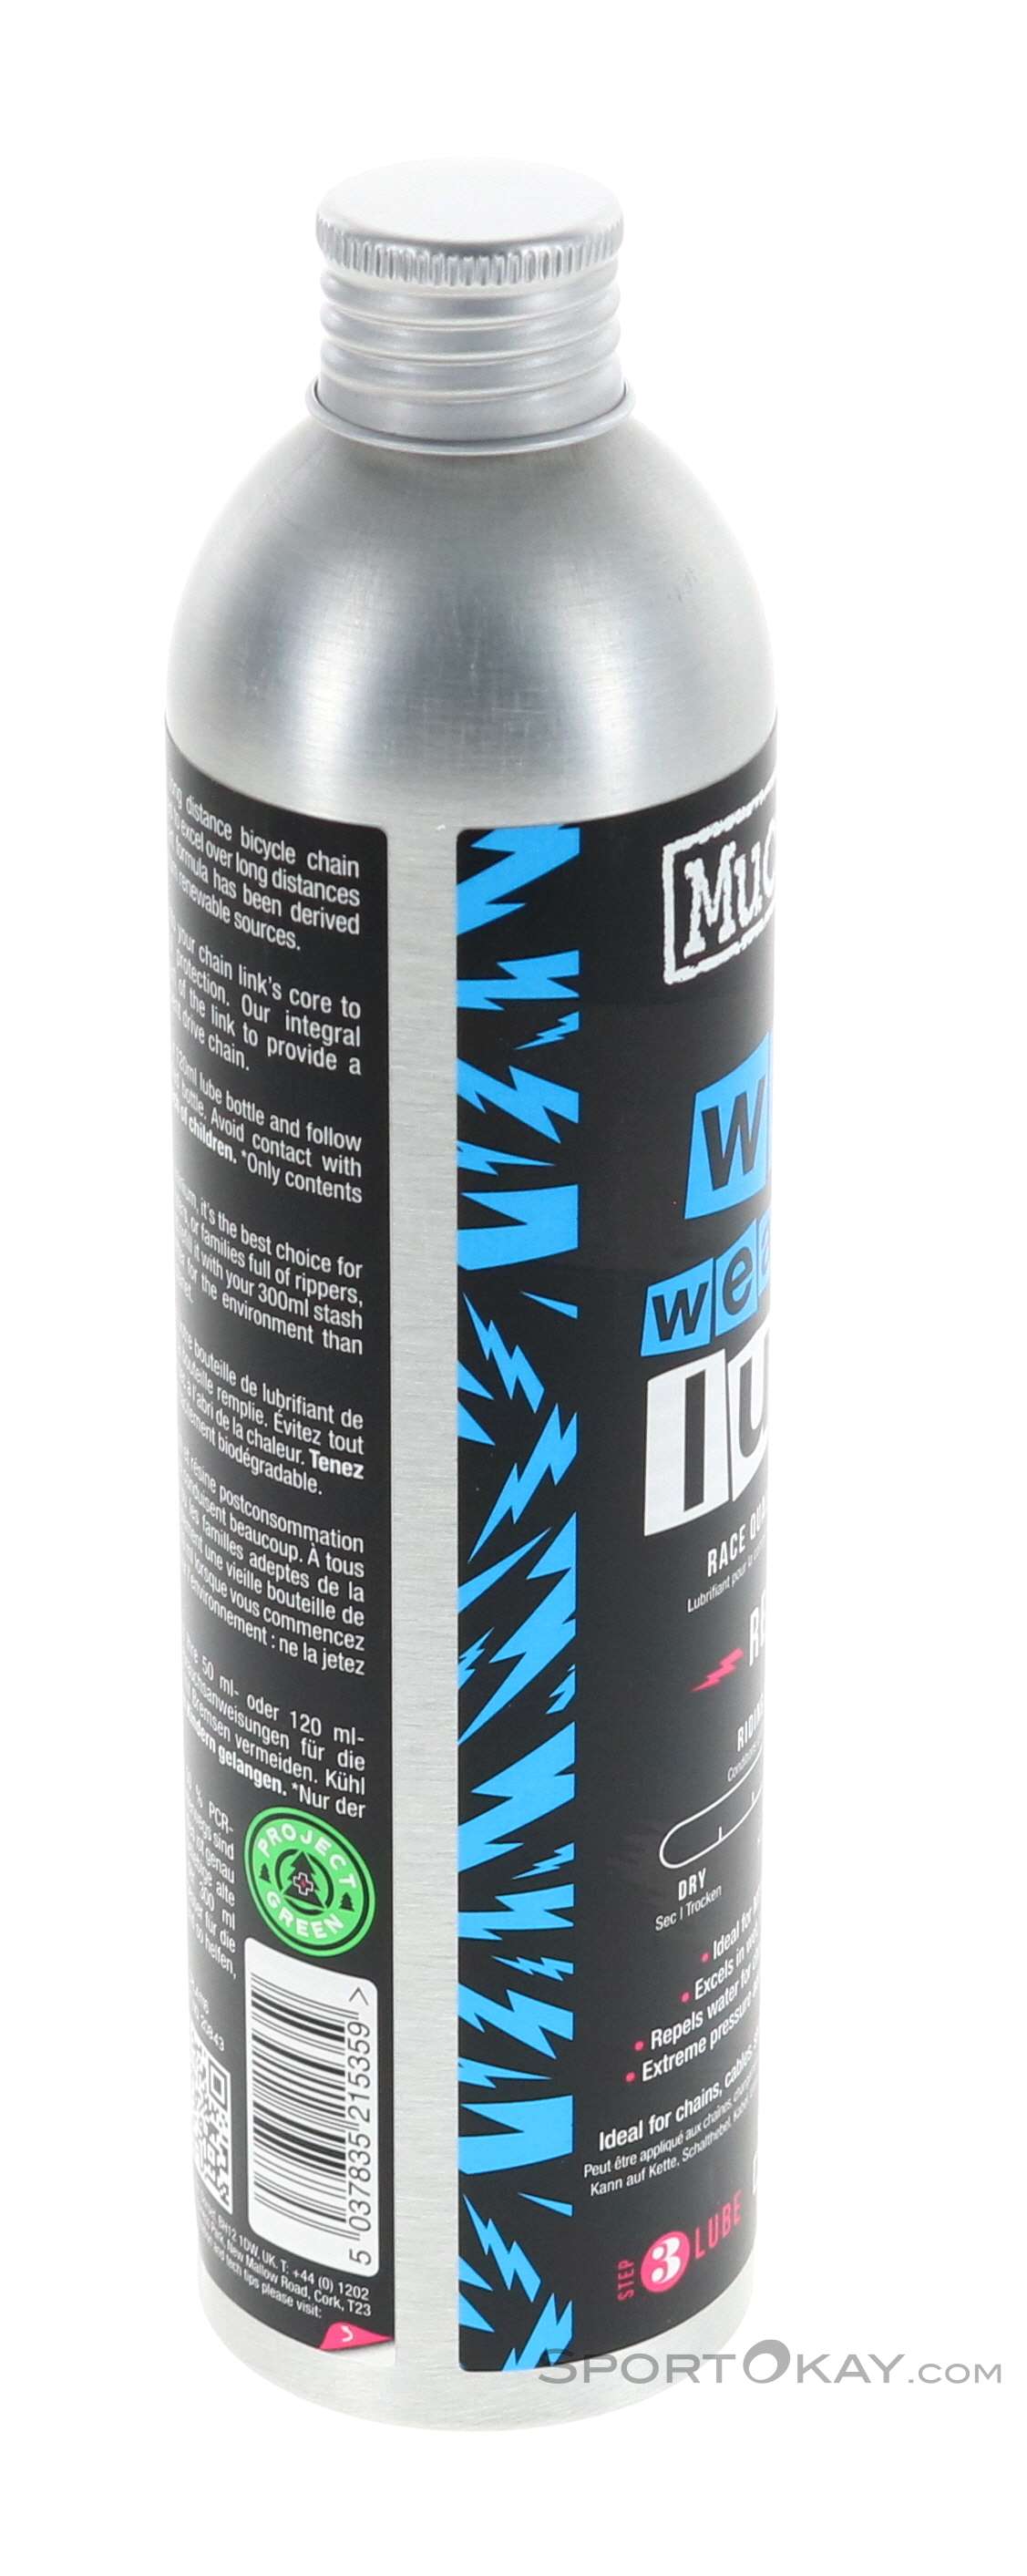  Muc-Off Dry Chain Lube, 50 Milliliters - Biodegradable Bike Chain  Lubricant, Suitable For All Types Of Bike - Formulated For Dry Weather  Conditions : Bike Oils : Sports & Outdoors